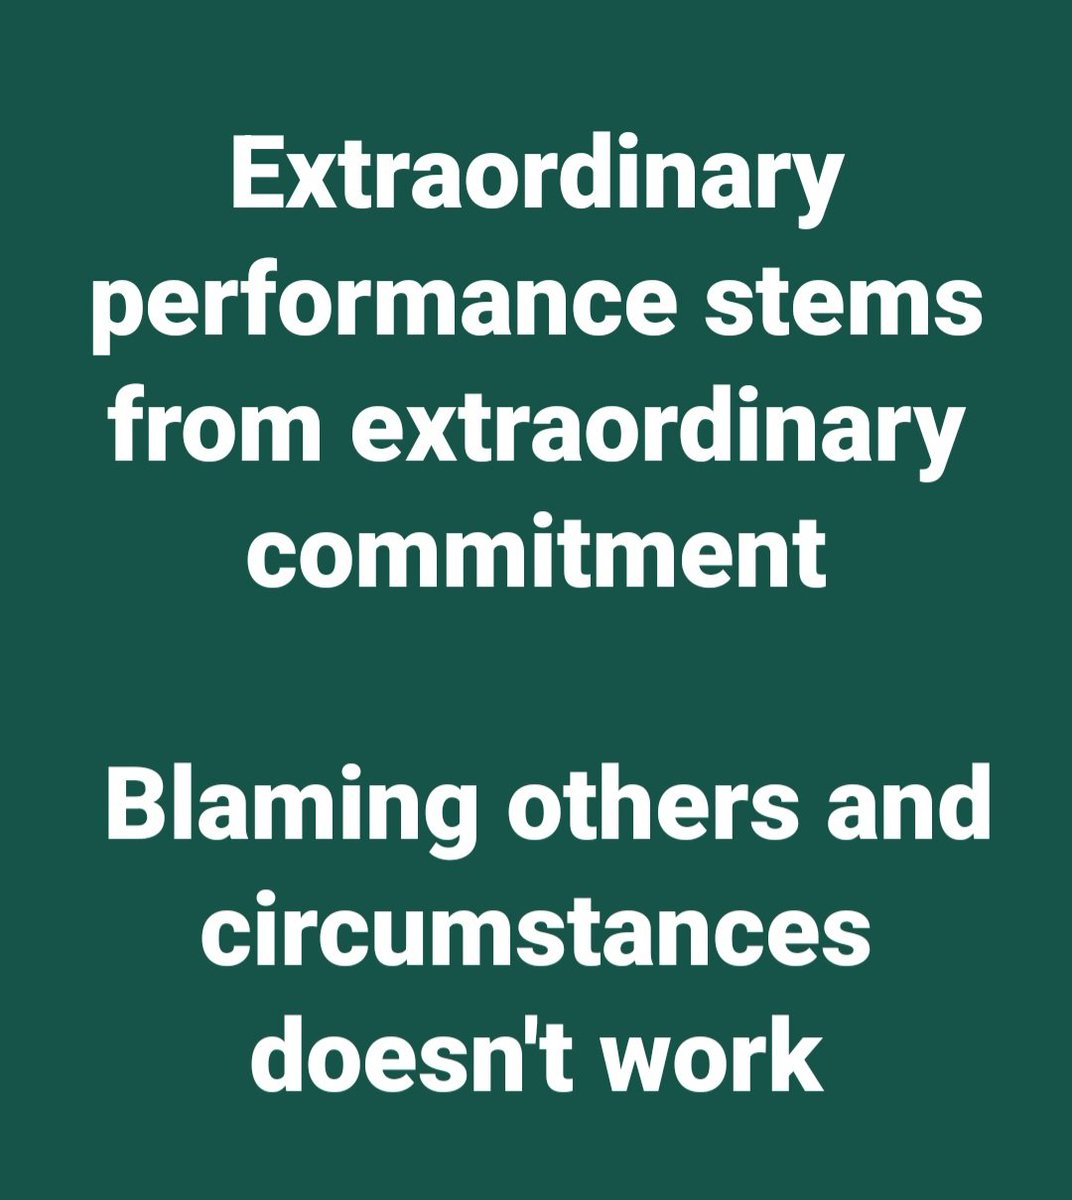 Extraordinary commitment means exceptional dedication 💯❤️🙋‍♂️

#BreakTheLimits #growwithus #GrowthMindset #growtogether #GrowthThroughChallenges #growyourbusiness #growbigger #growyourself  #achieveyourdreams #actiontaker #dreambigger #togetherwecandomore